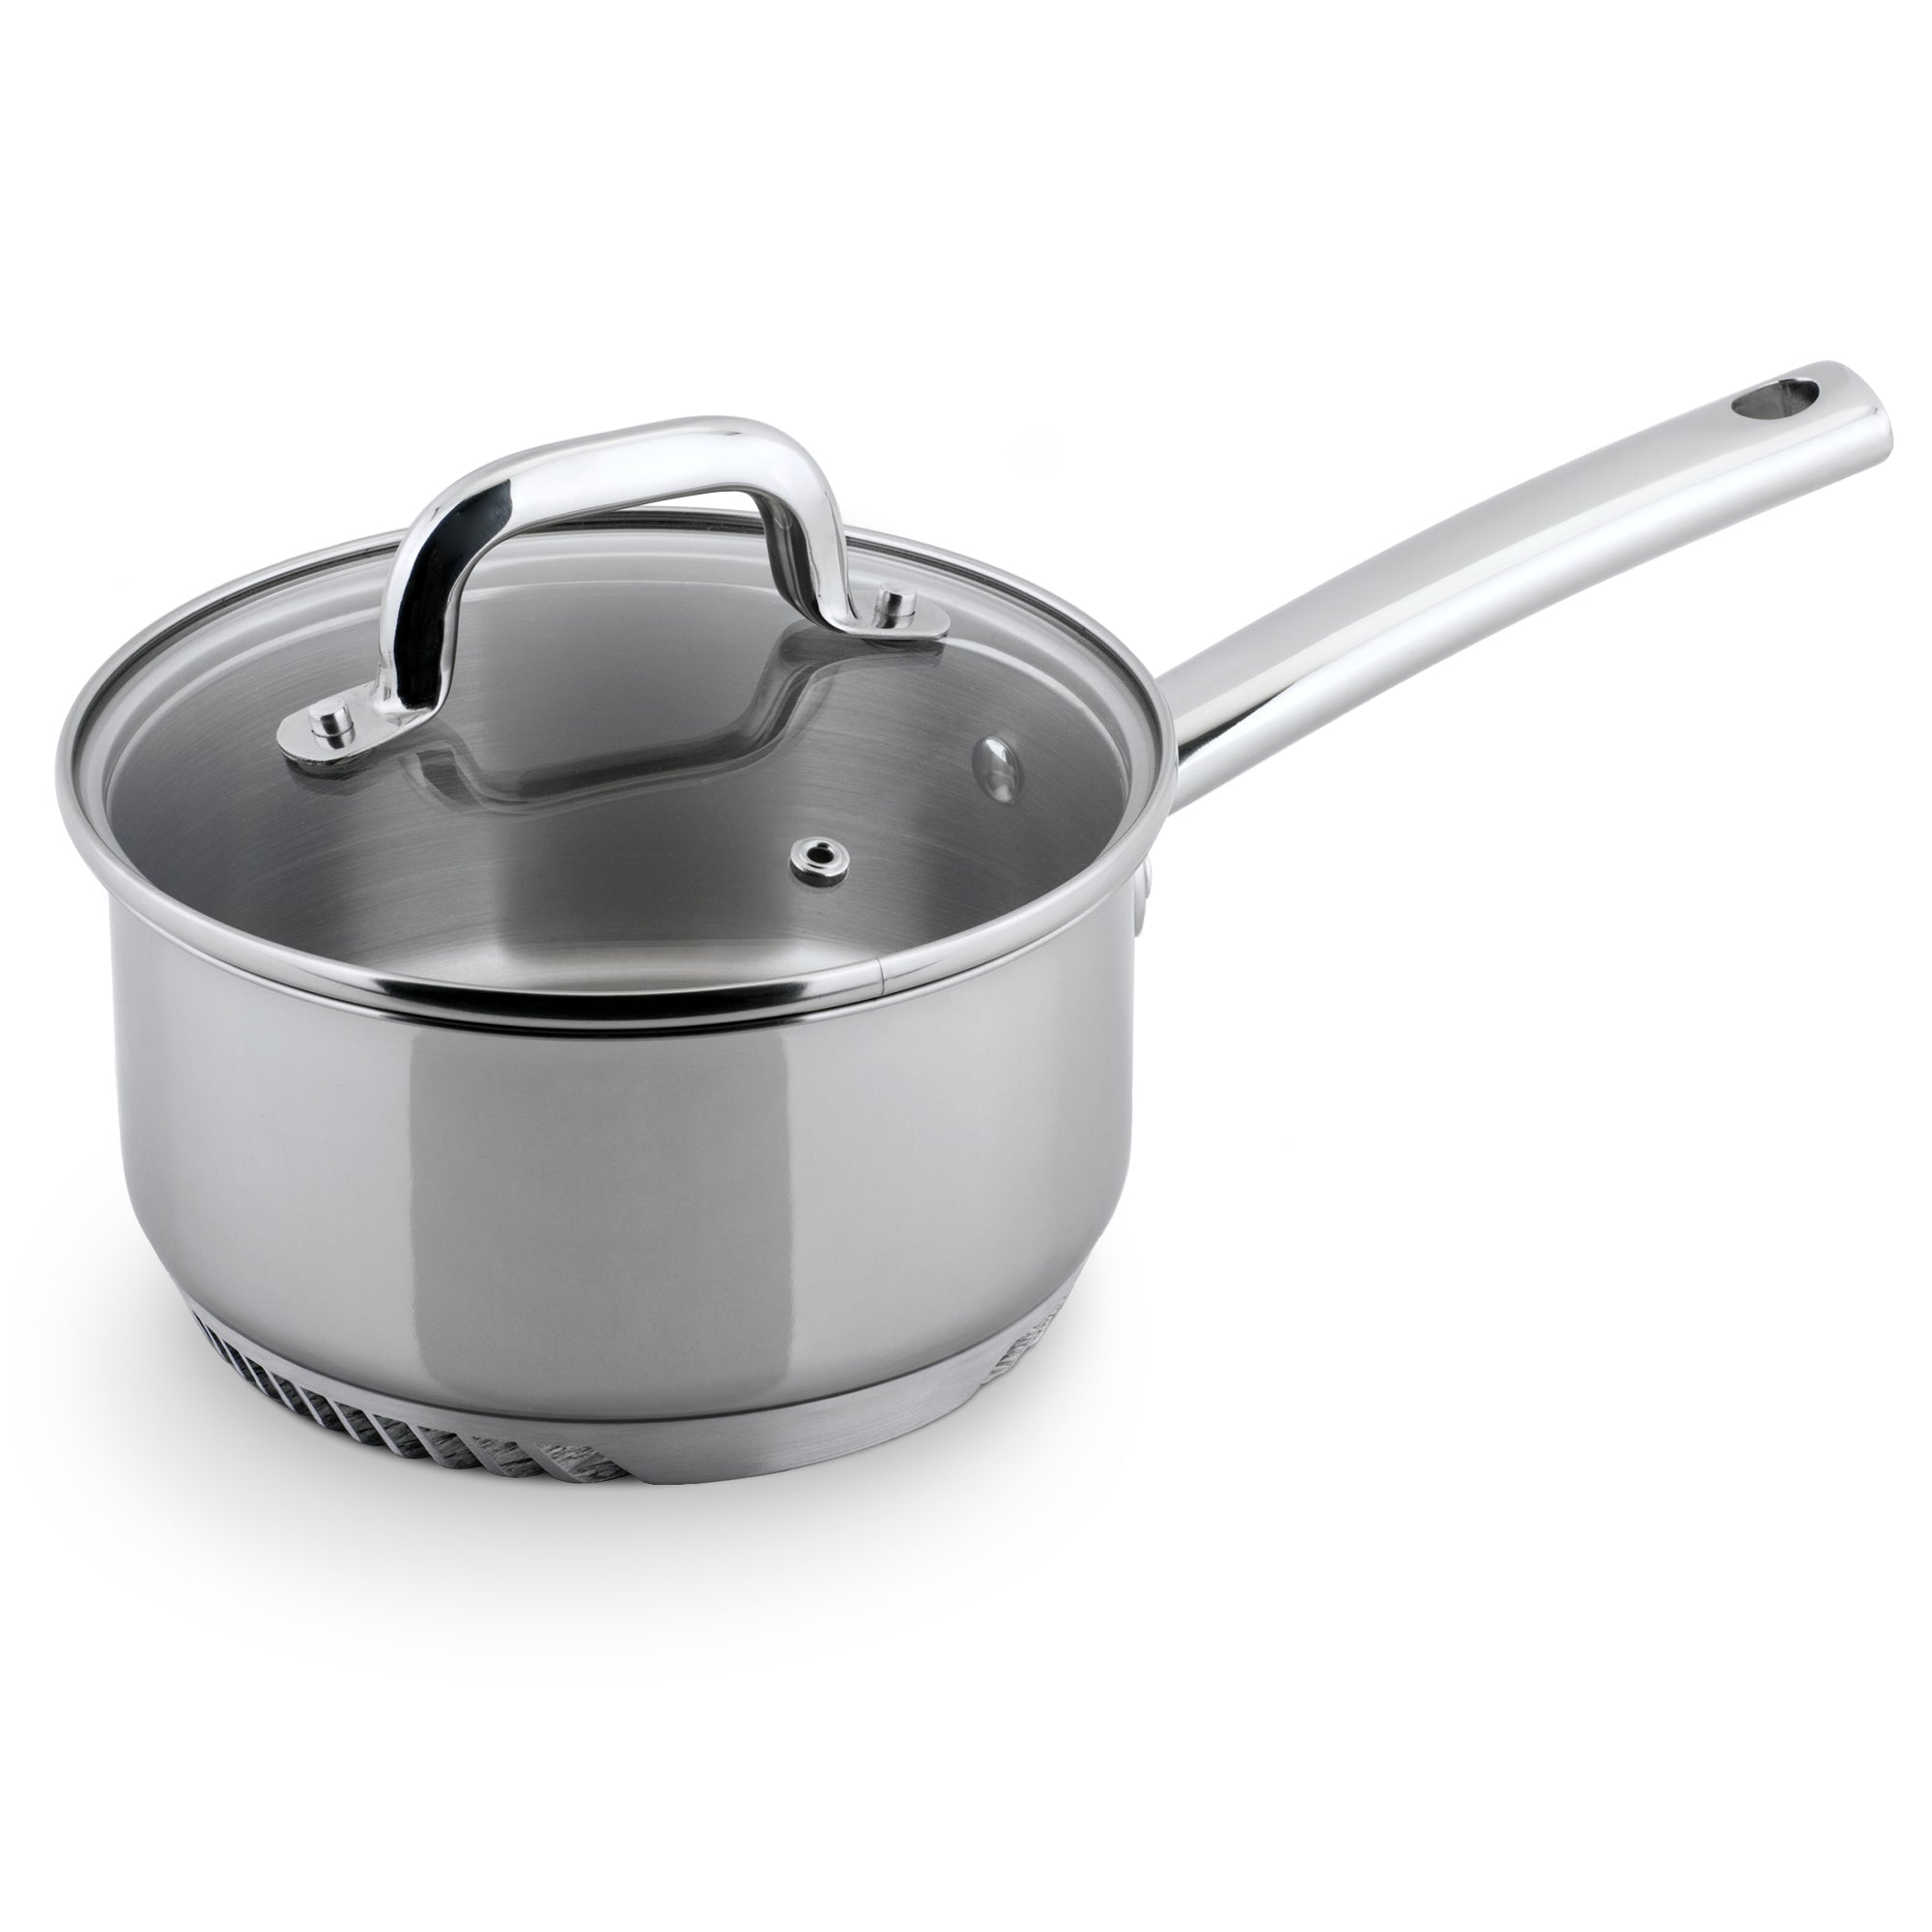 NEW Cuisinart Stainless Steel 2qt saucepan sauce pan with Lid, Black Handle